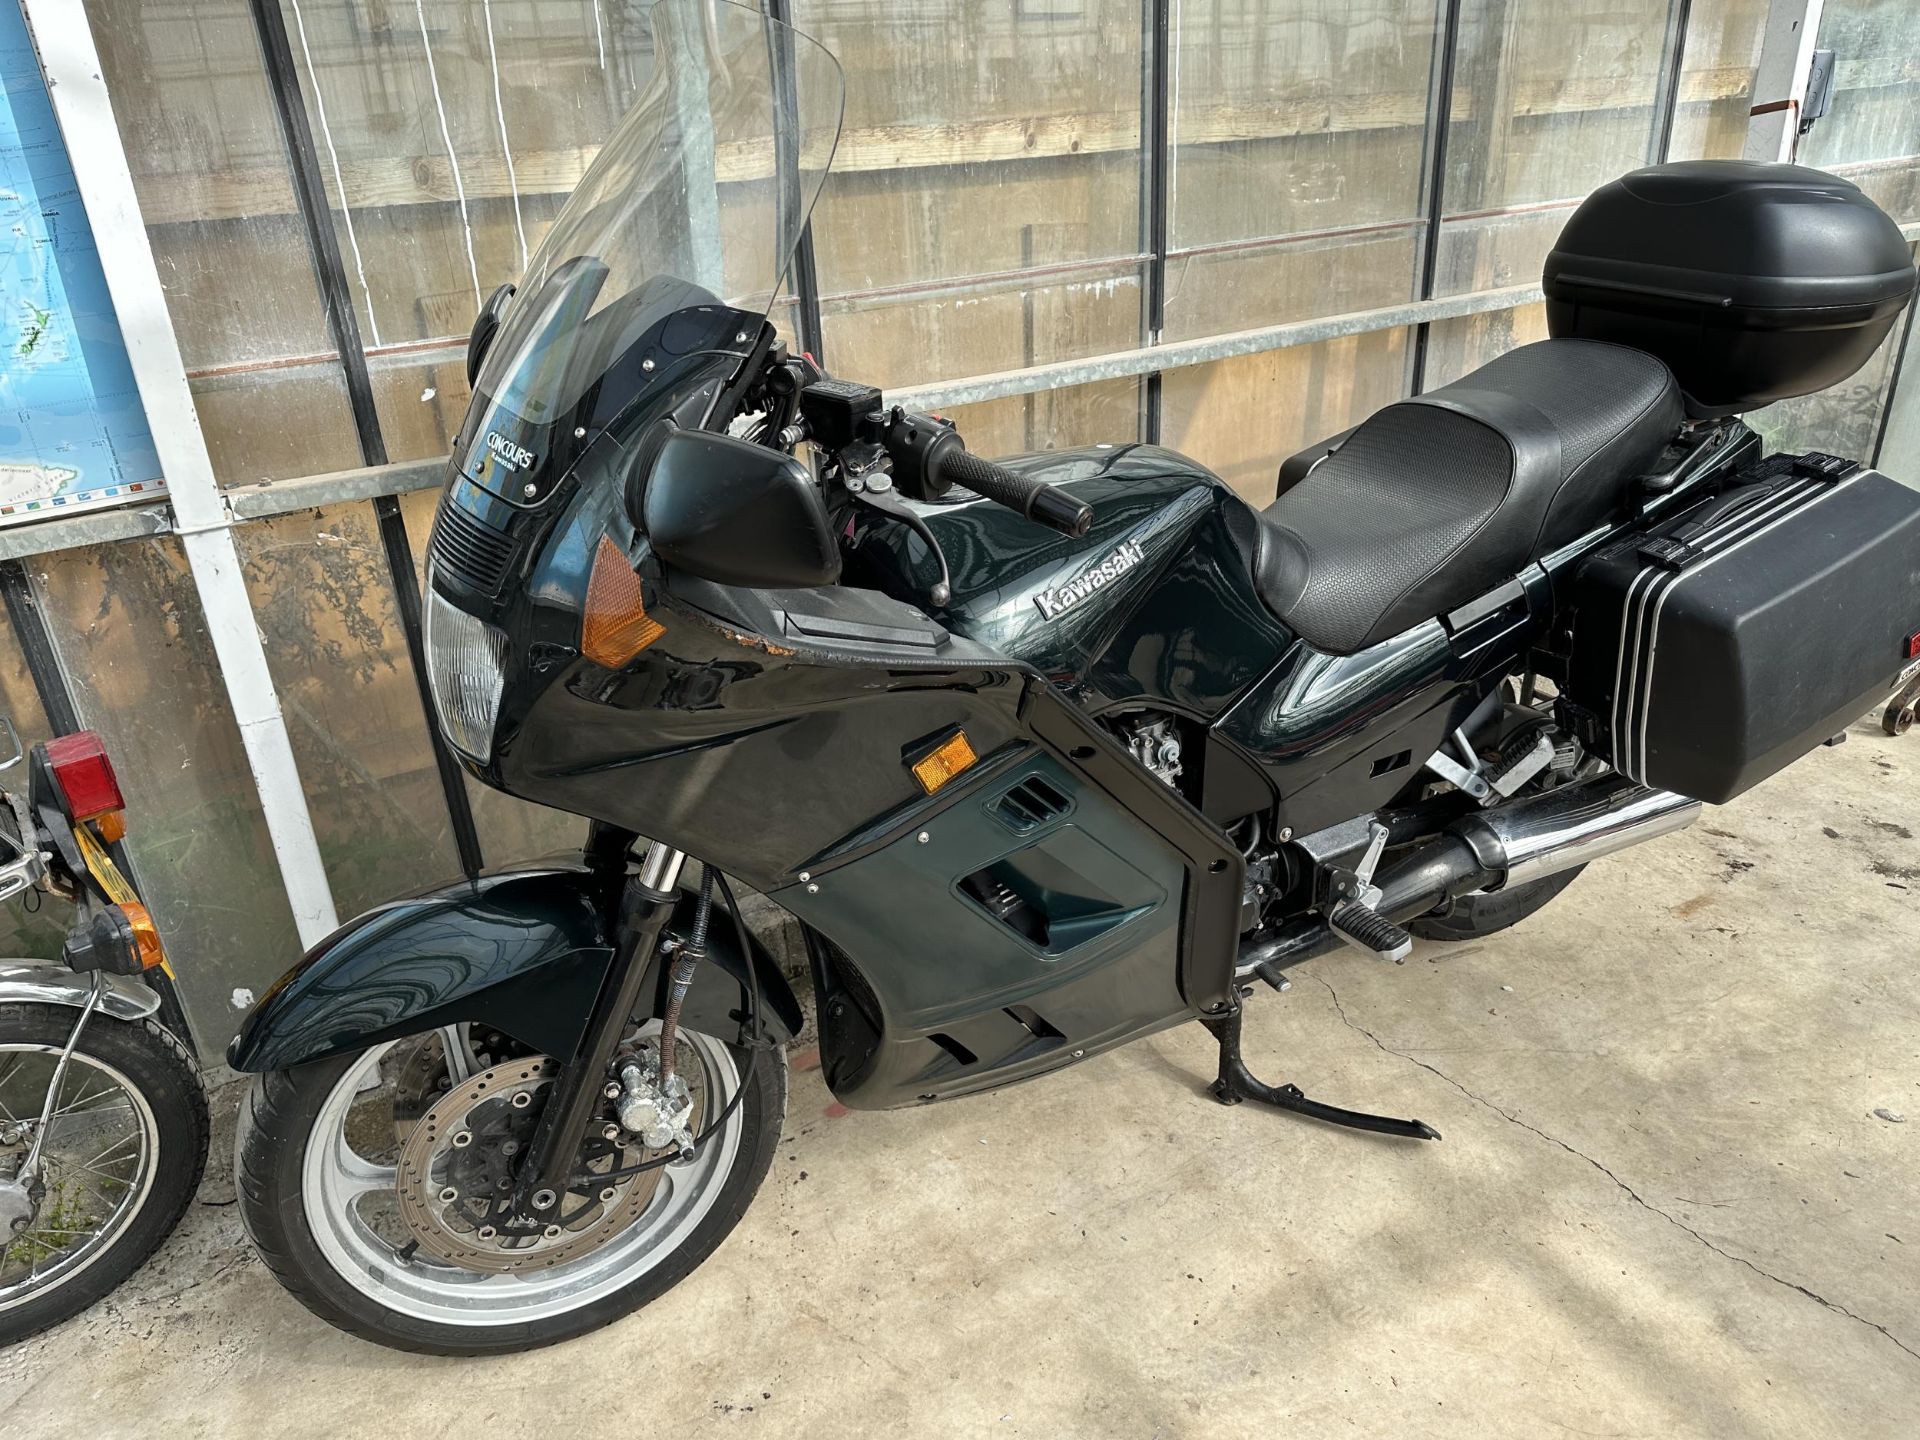 A 1997 KAWASAKI GTR 1000 CONCOURS MOTORCYCLE, 1000 CC, 61325 MILES, NEW BATTERY, MOT UNTIL 29TH